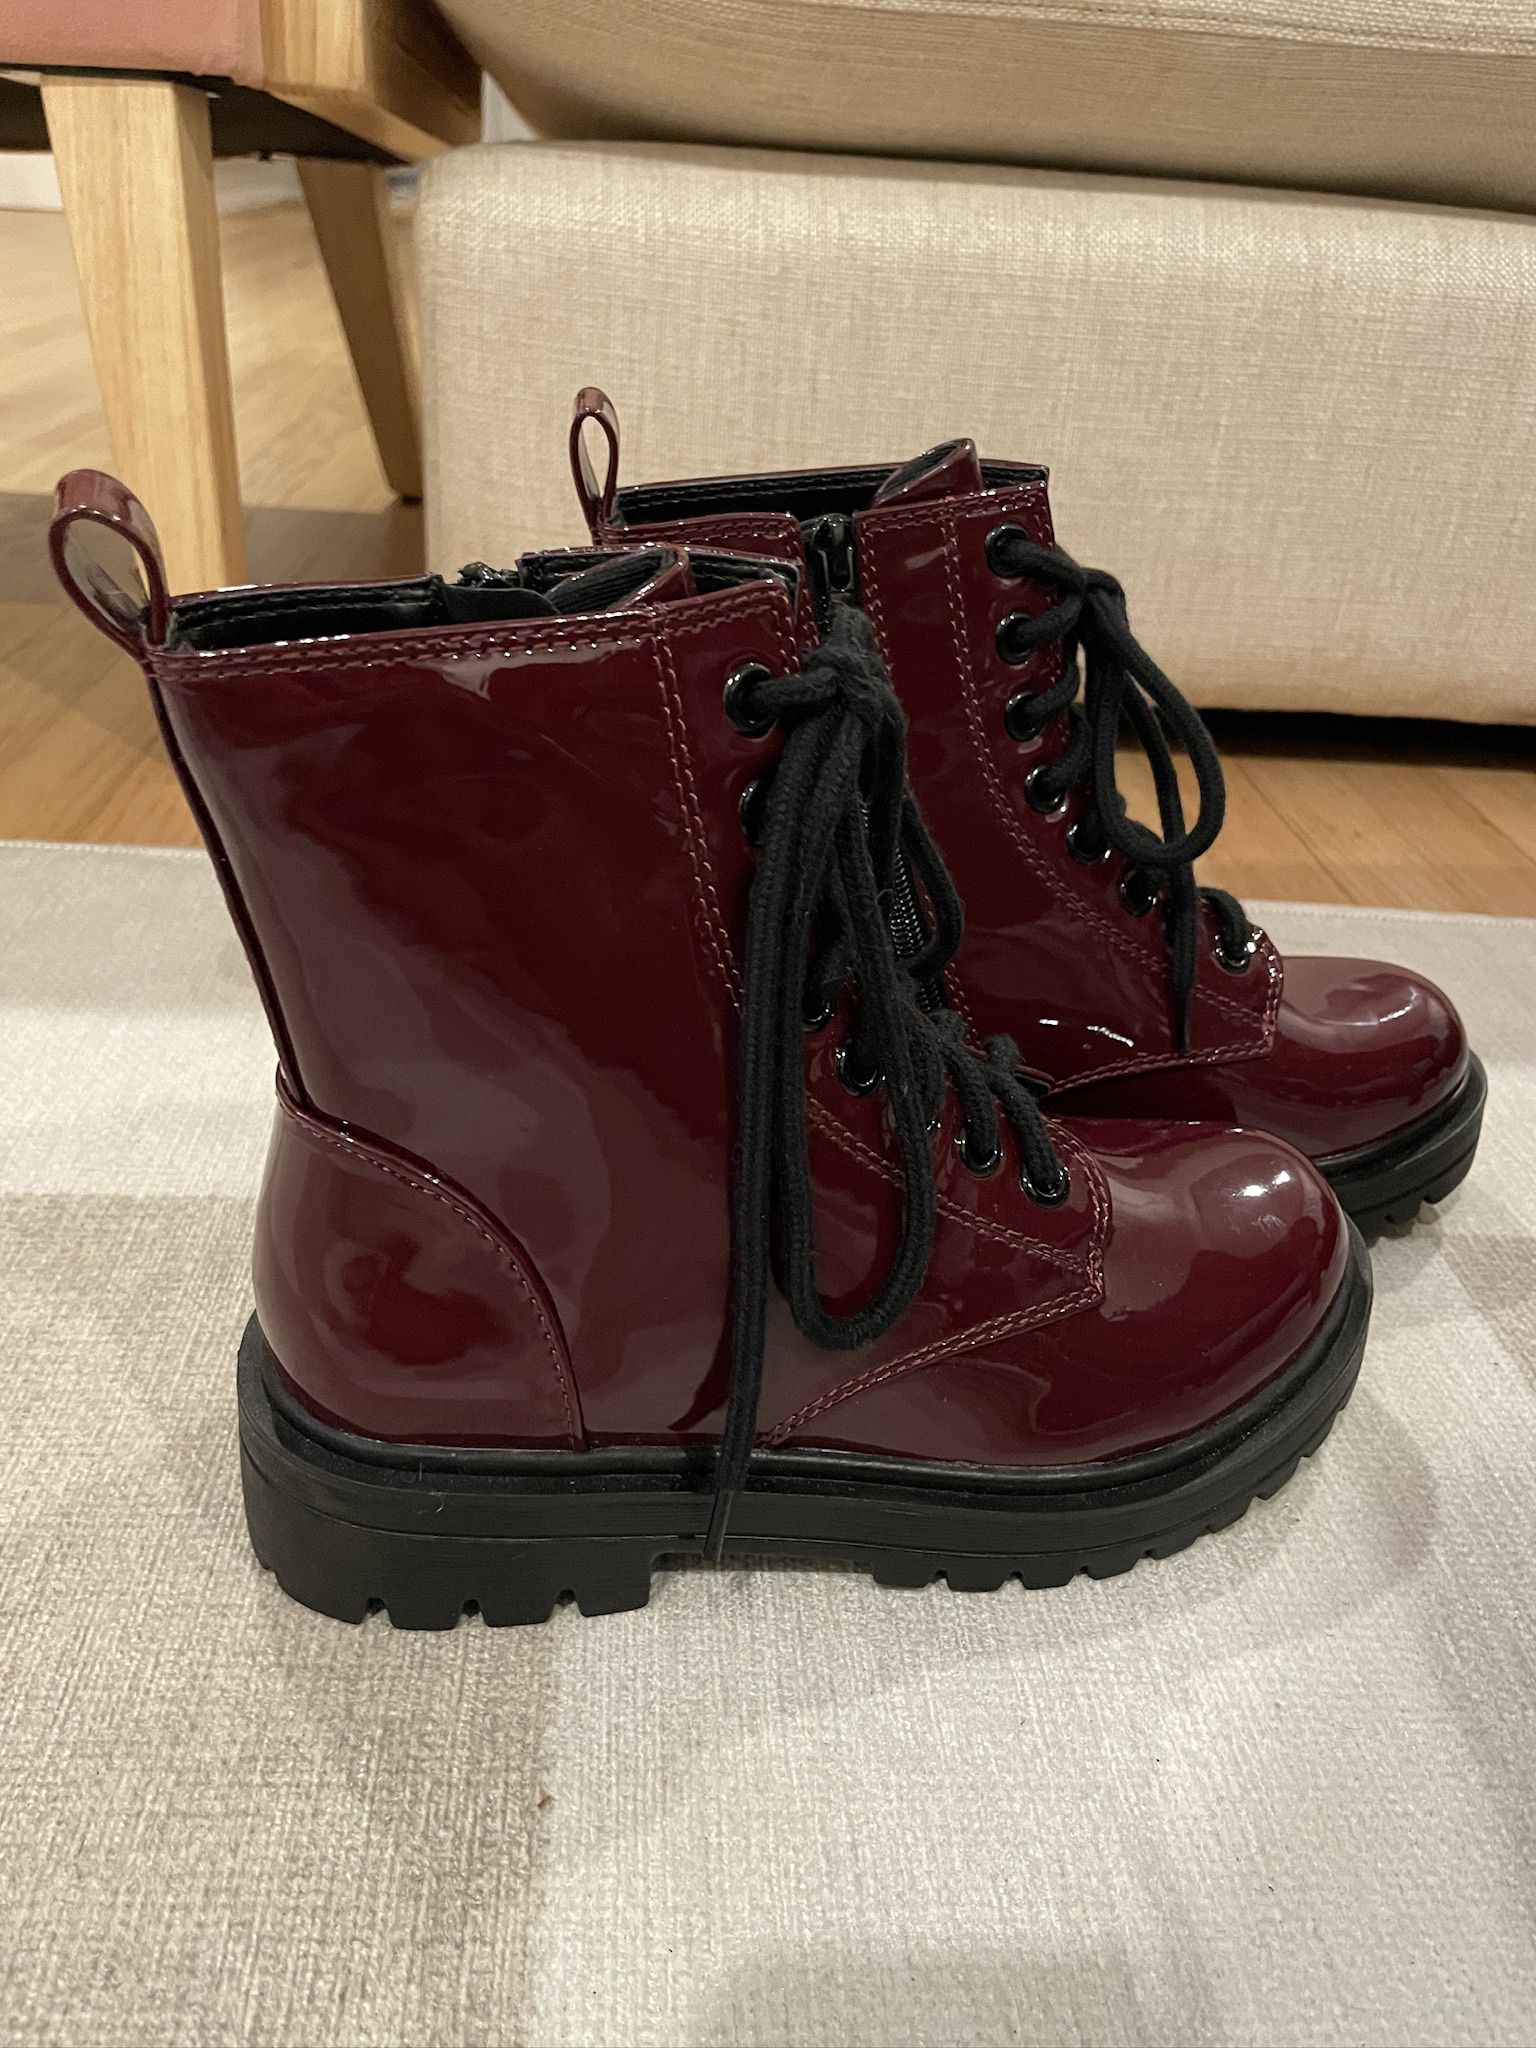 New Burgundy Combat Boots - Size 6.5